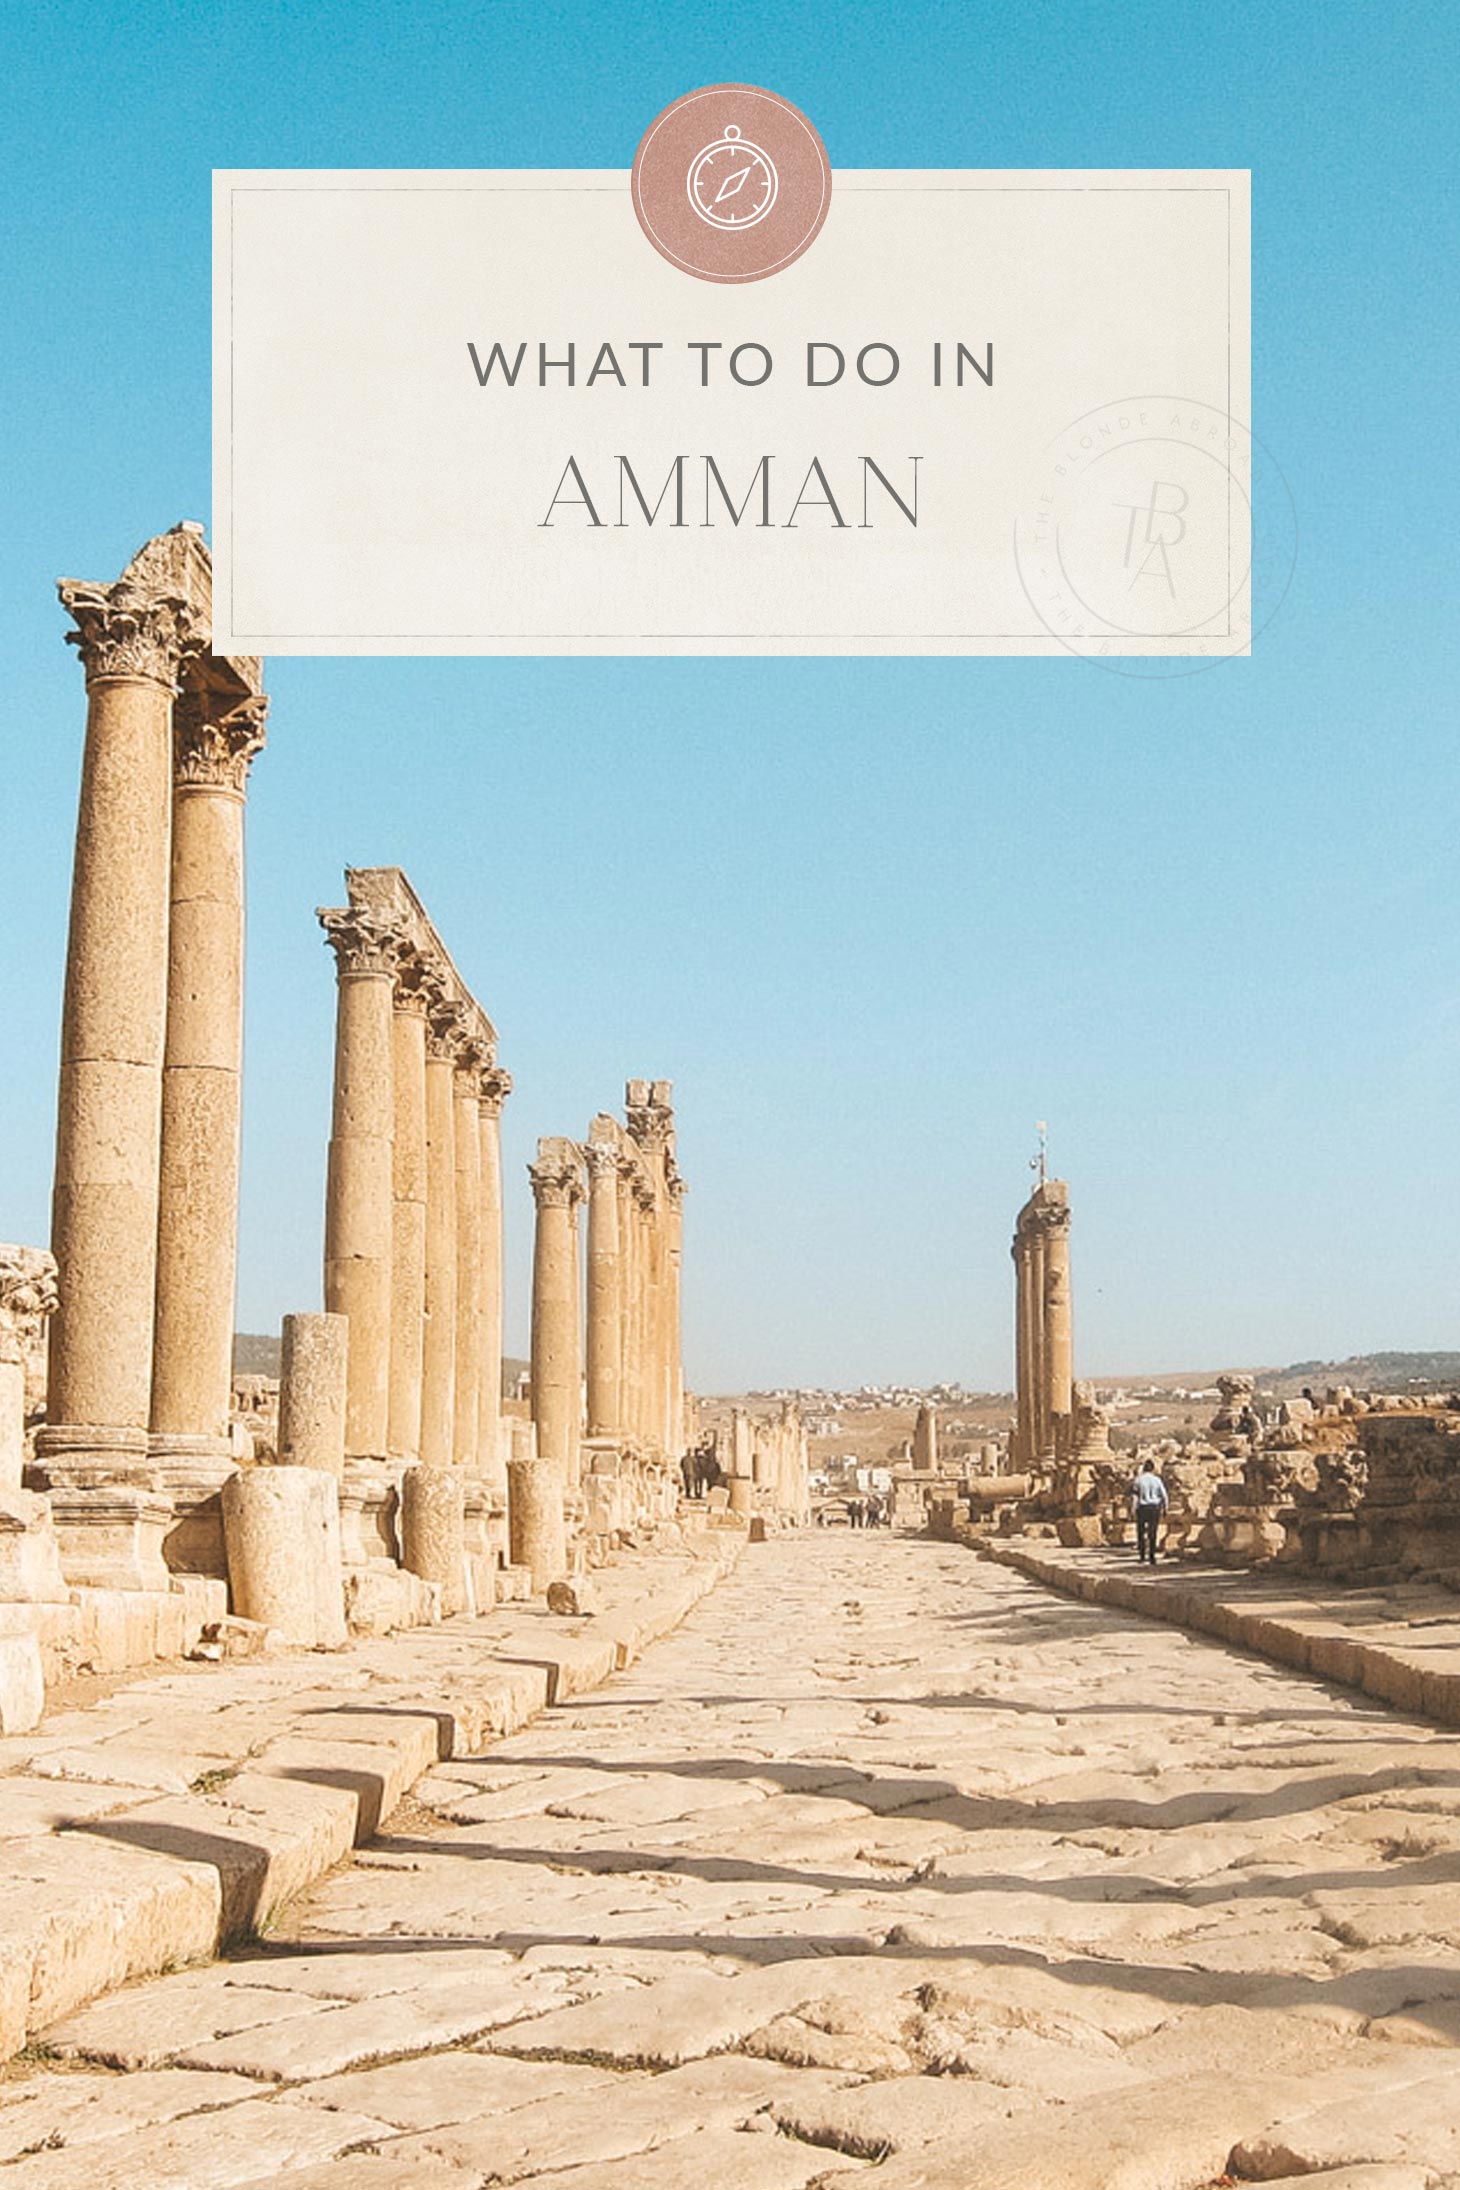 The Complete Guide to Visiting the Amman Citadel - CHARLIES WANDERINGS